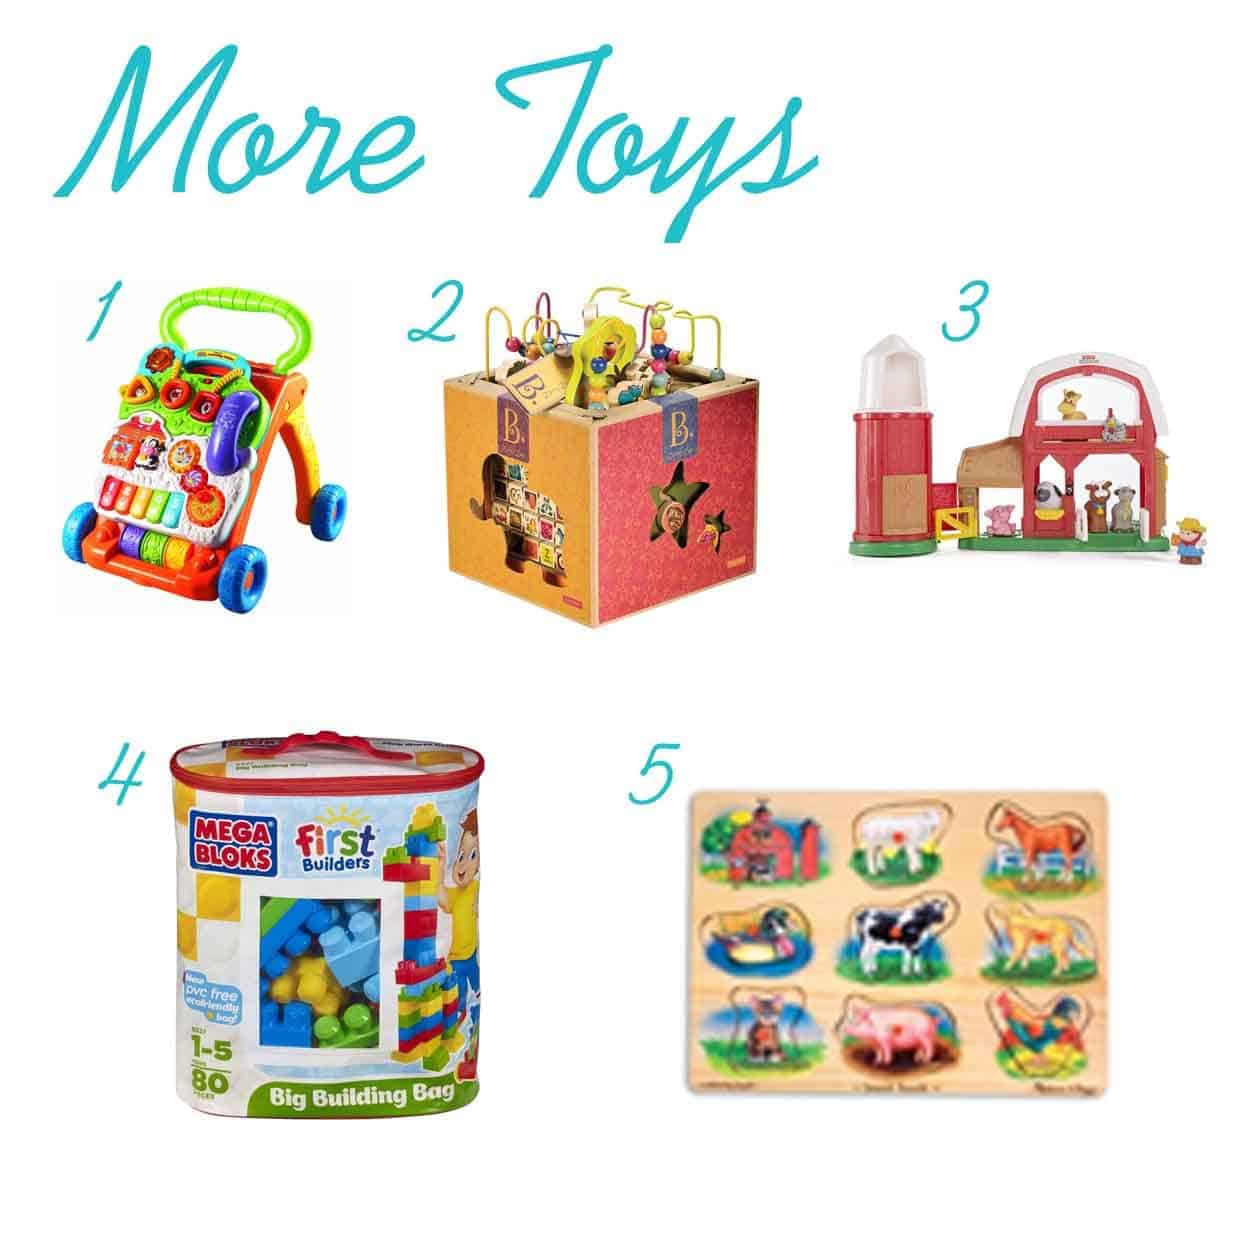 Birthday Gift Ideas For A 1 Year Old
 The Ultimate Gift List for a 1 Year Old Boy • The Pinning